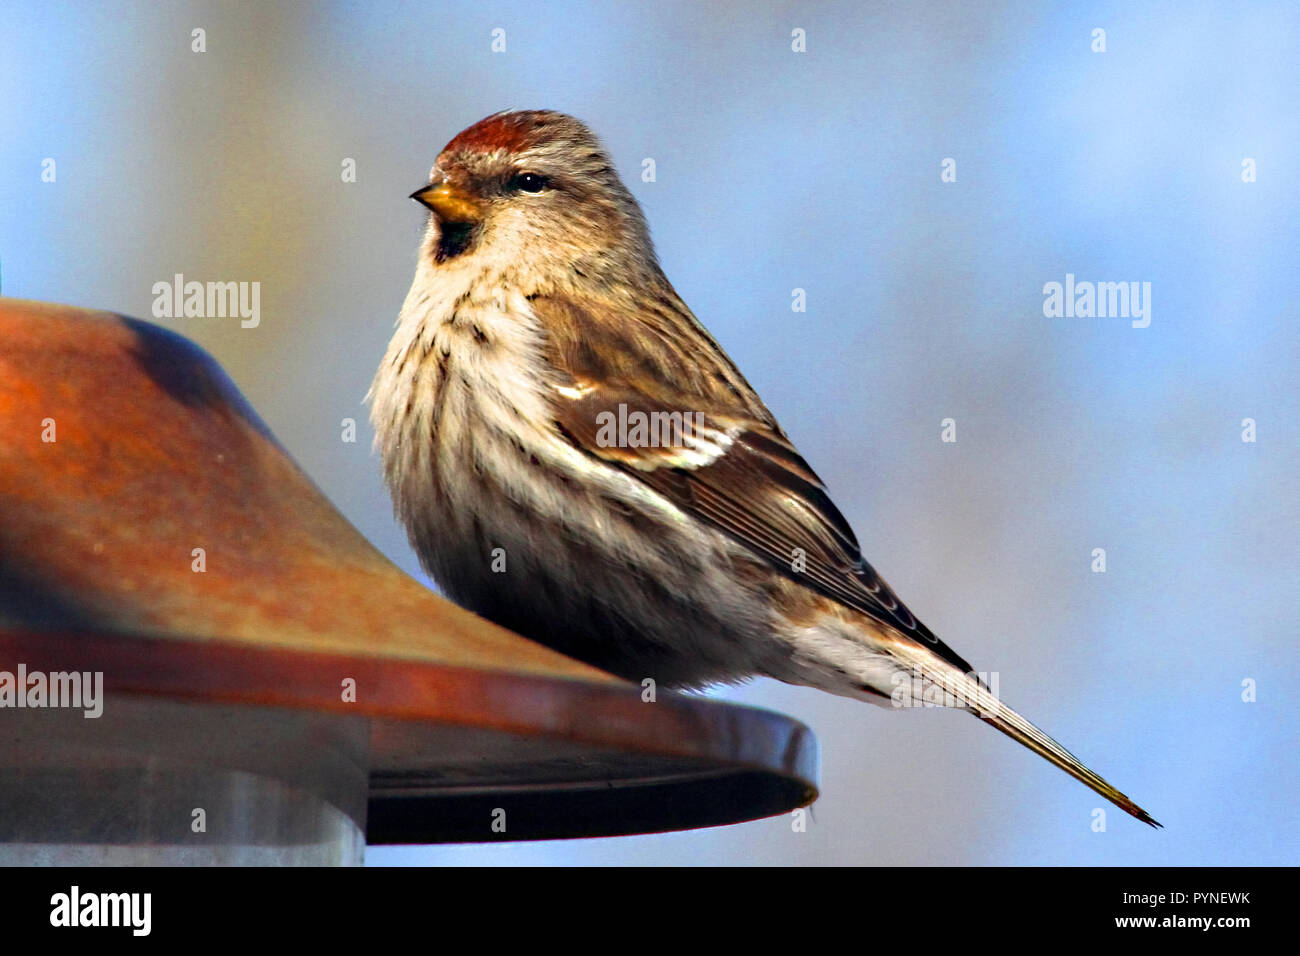 Common Redpoll, (Acanthis flammea) Still widespread and abundant in birches, thickets, tundra scrub,winter and weeds. Stock Photo